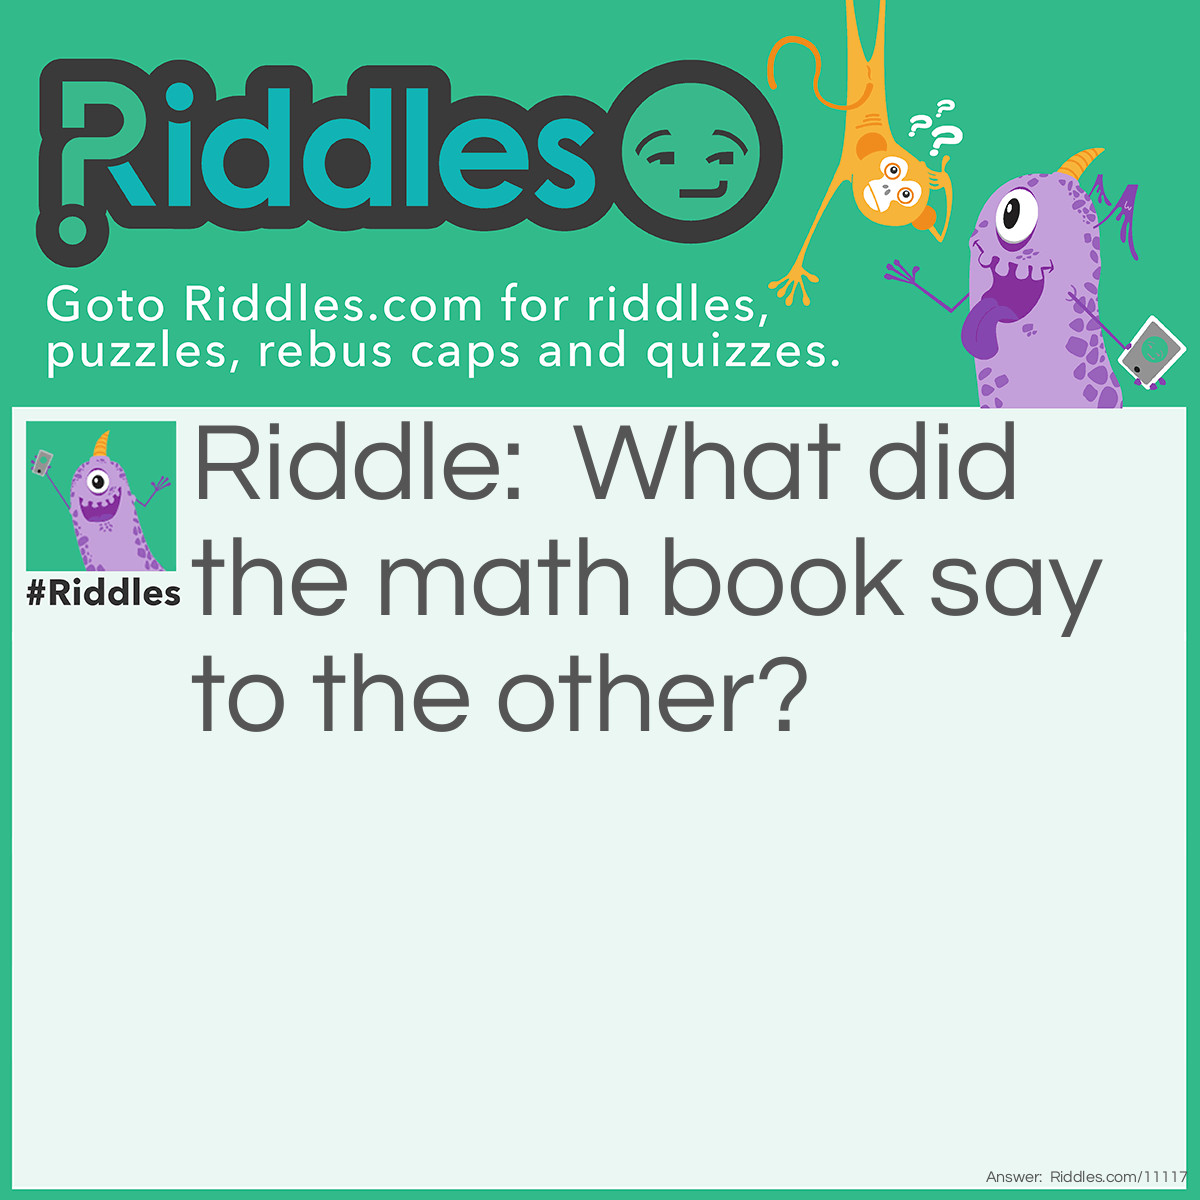 Riddle: What did the math book say to the other? Answer: Do you have any problems?